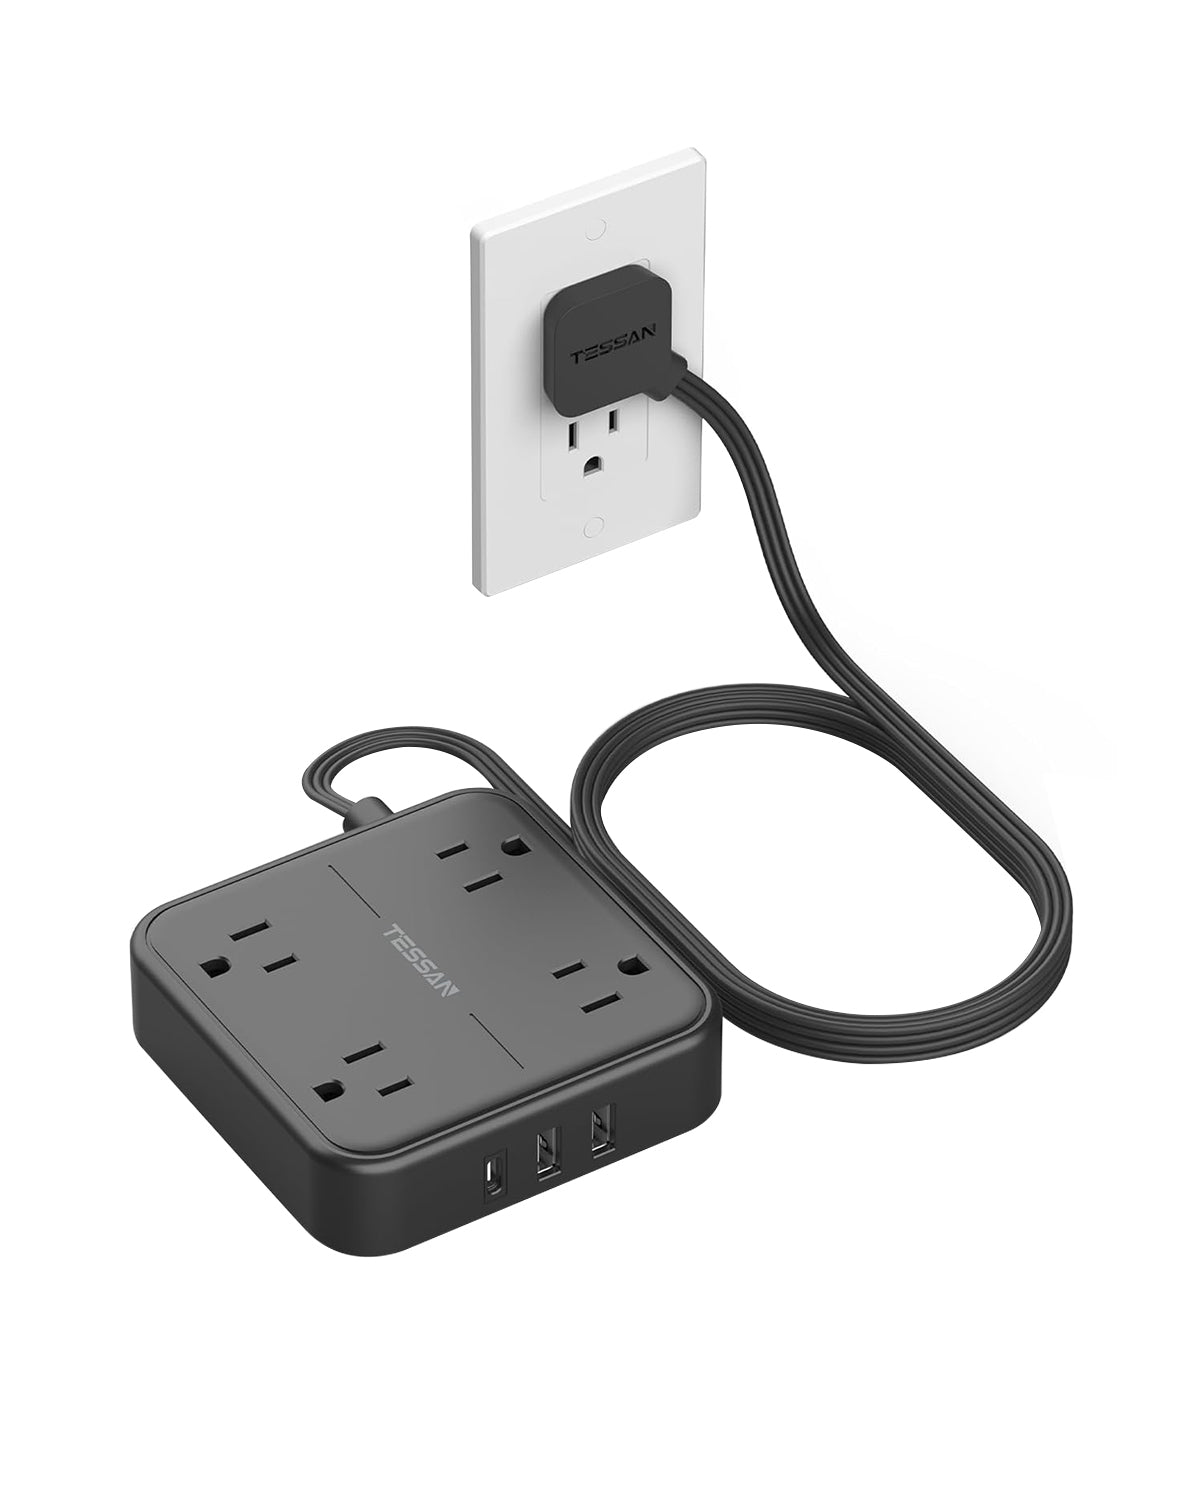 TESSAN 5 ft Ultra Thin Black Extension Cord with 3 USB Wall Charger(1 USB C Port), Flat Plug Power Strip